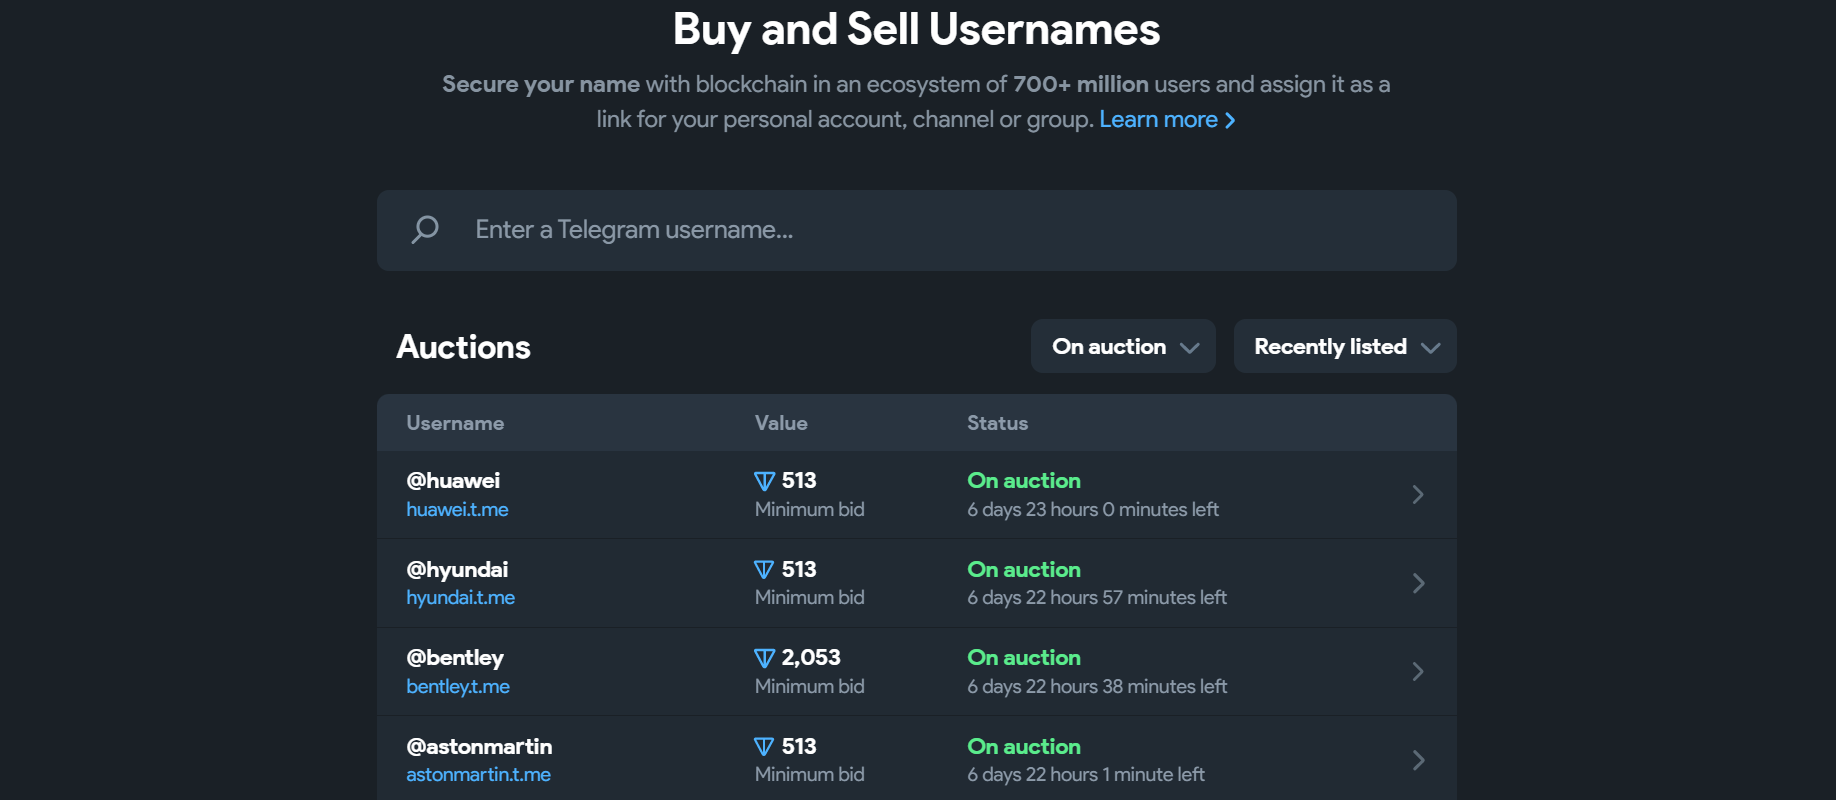 So far, the most valuable names available for purchase on the Fragment platform